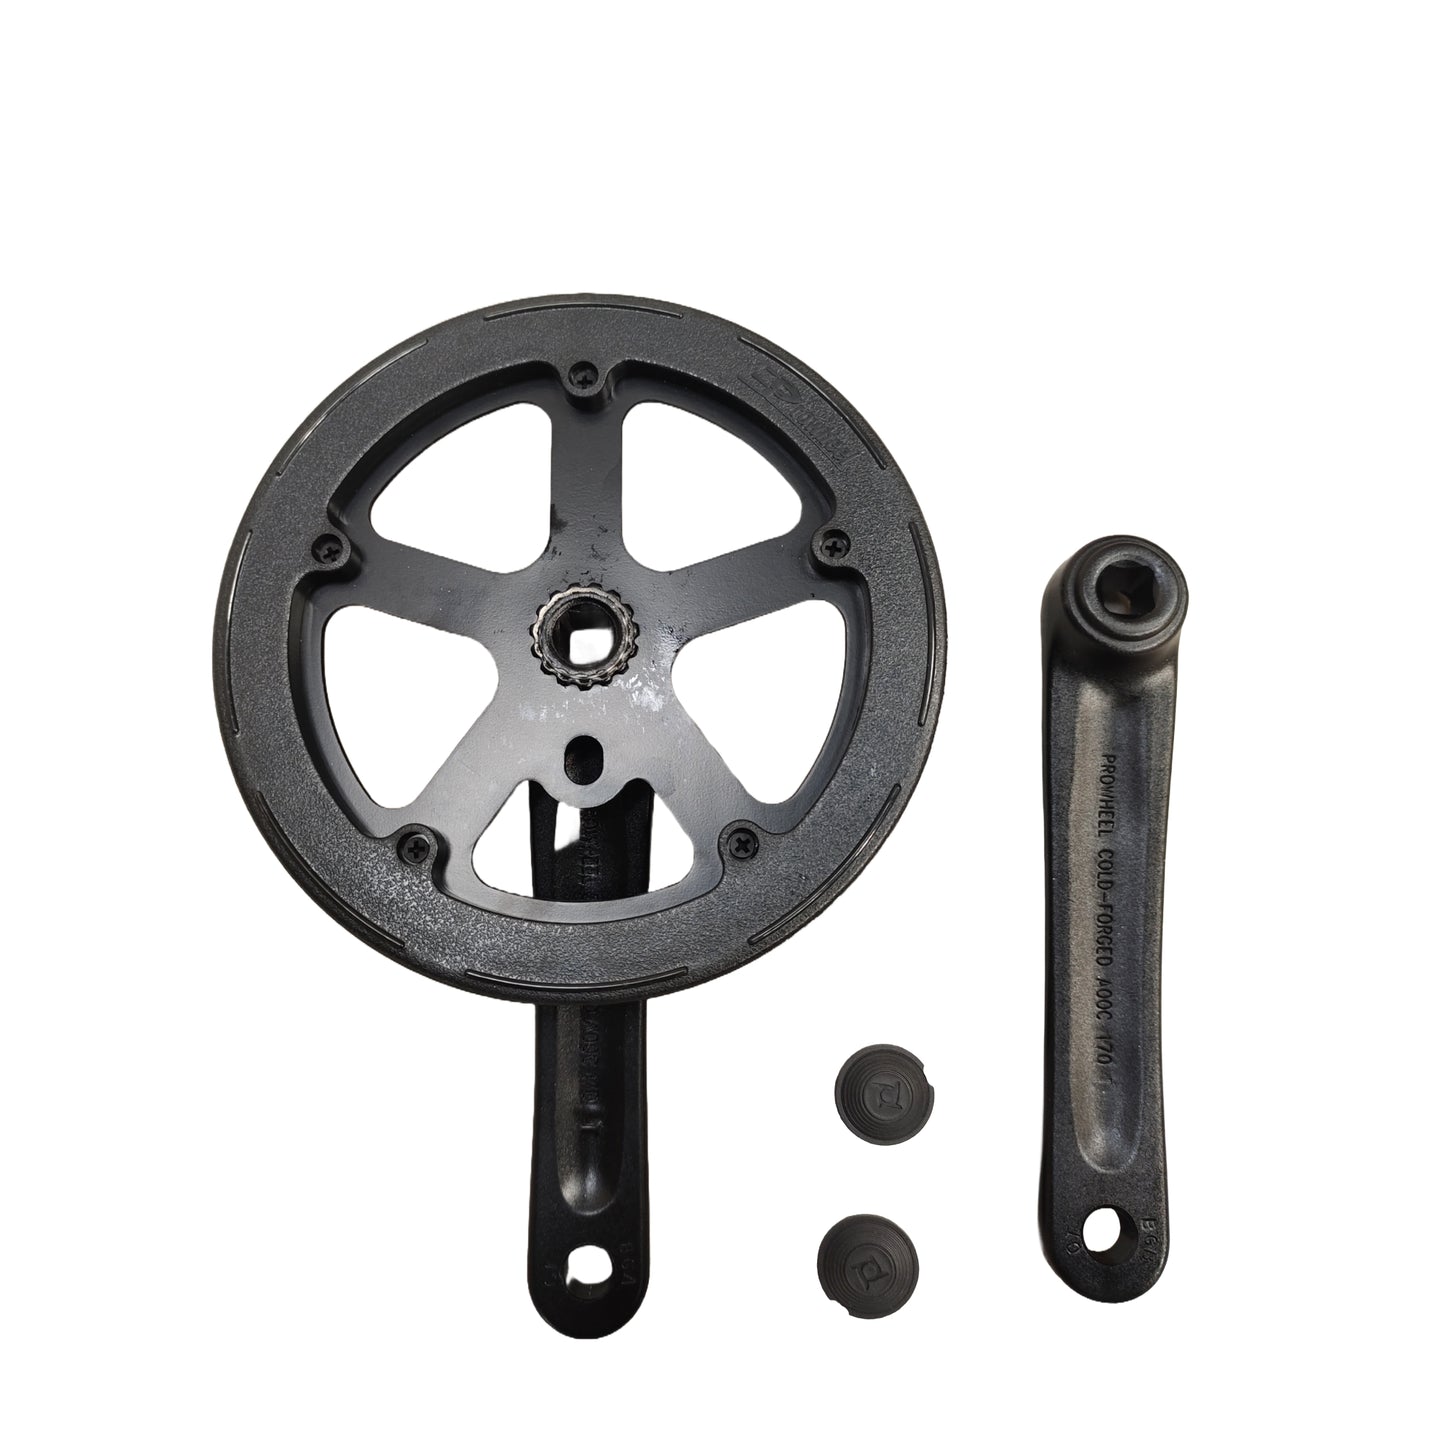 Bicycle crankset prowheel alloy single speed bottom view spare part by omobikes